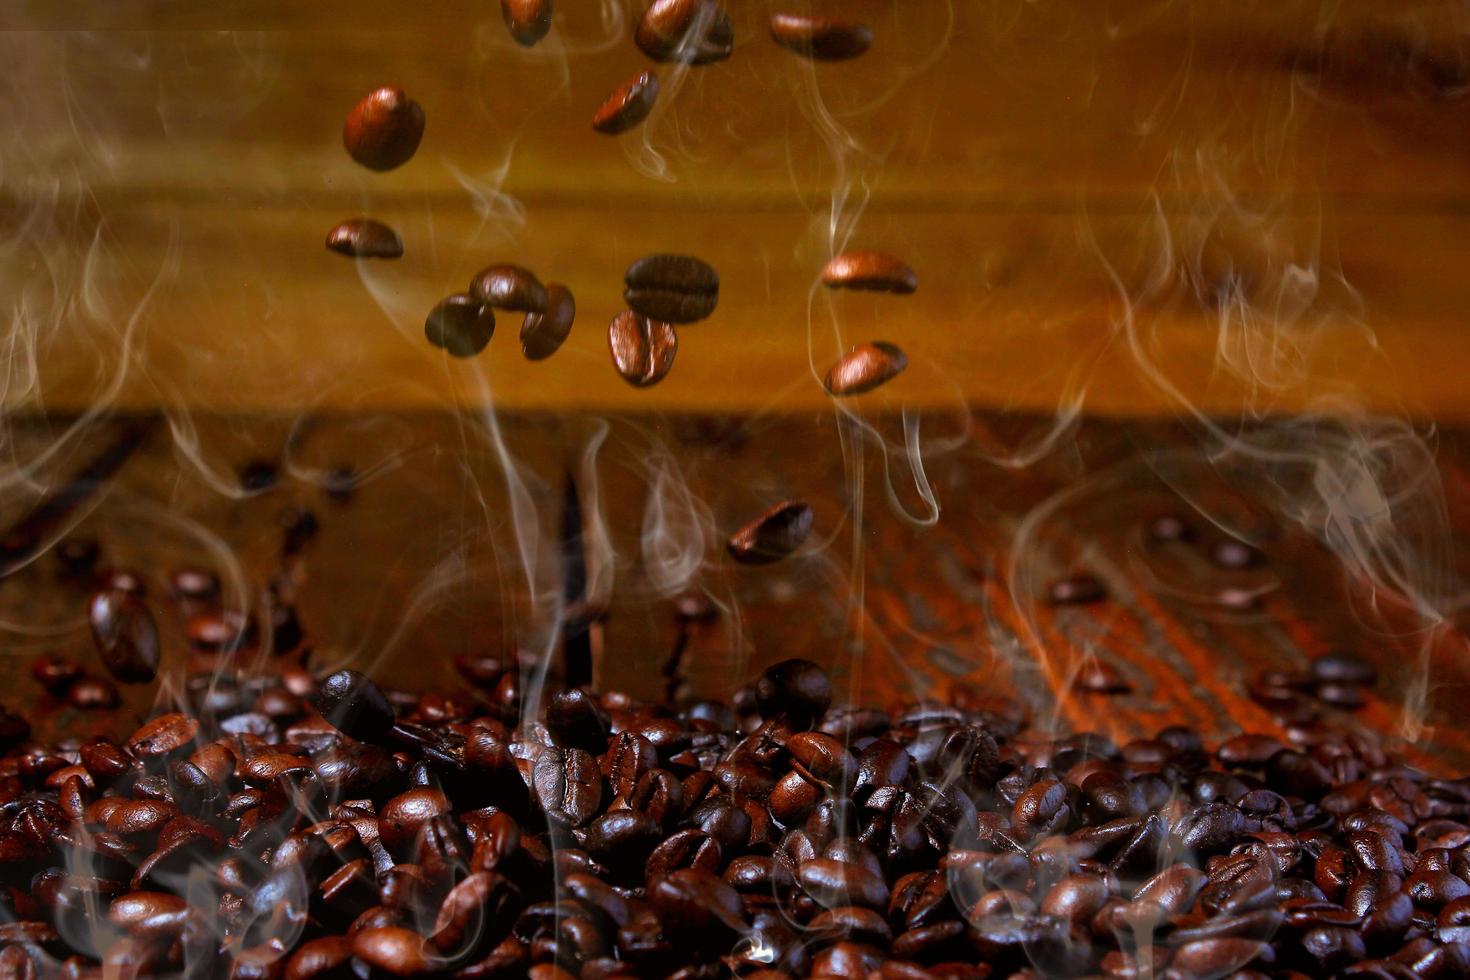 roasted coffee beans falling on stack, hot and smoky. Rustic wood background blurred photo